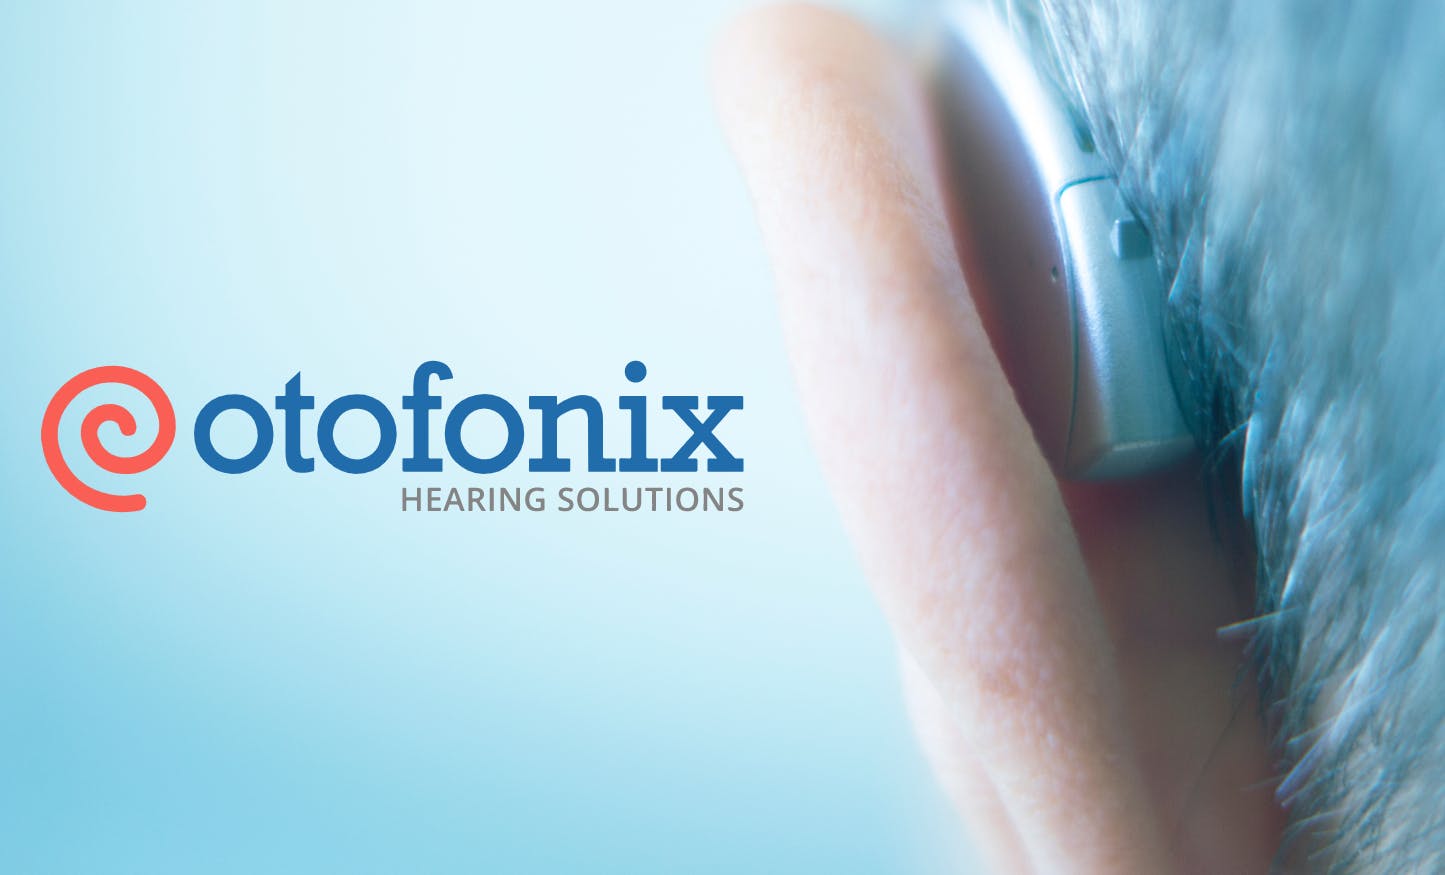 Otofonix Hearing Aids: Models Review, Prices, and Warranty